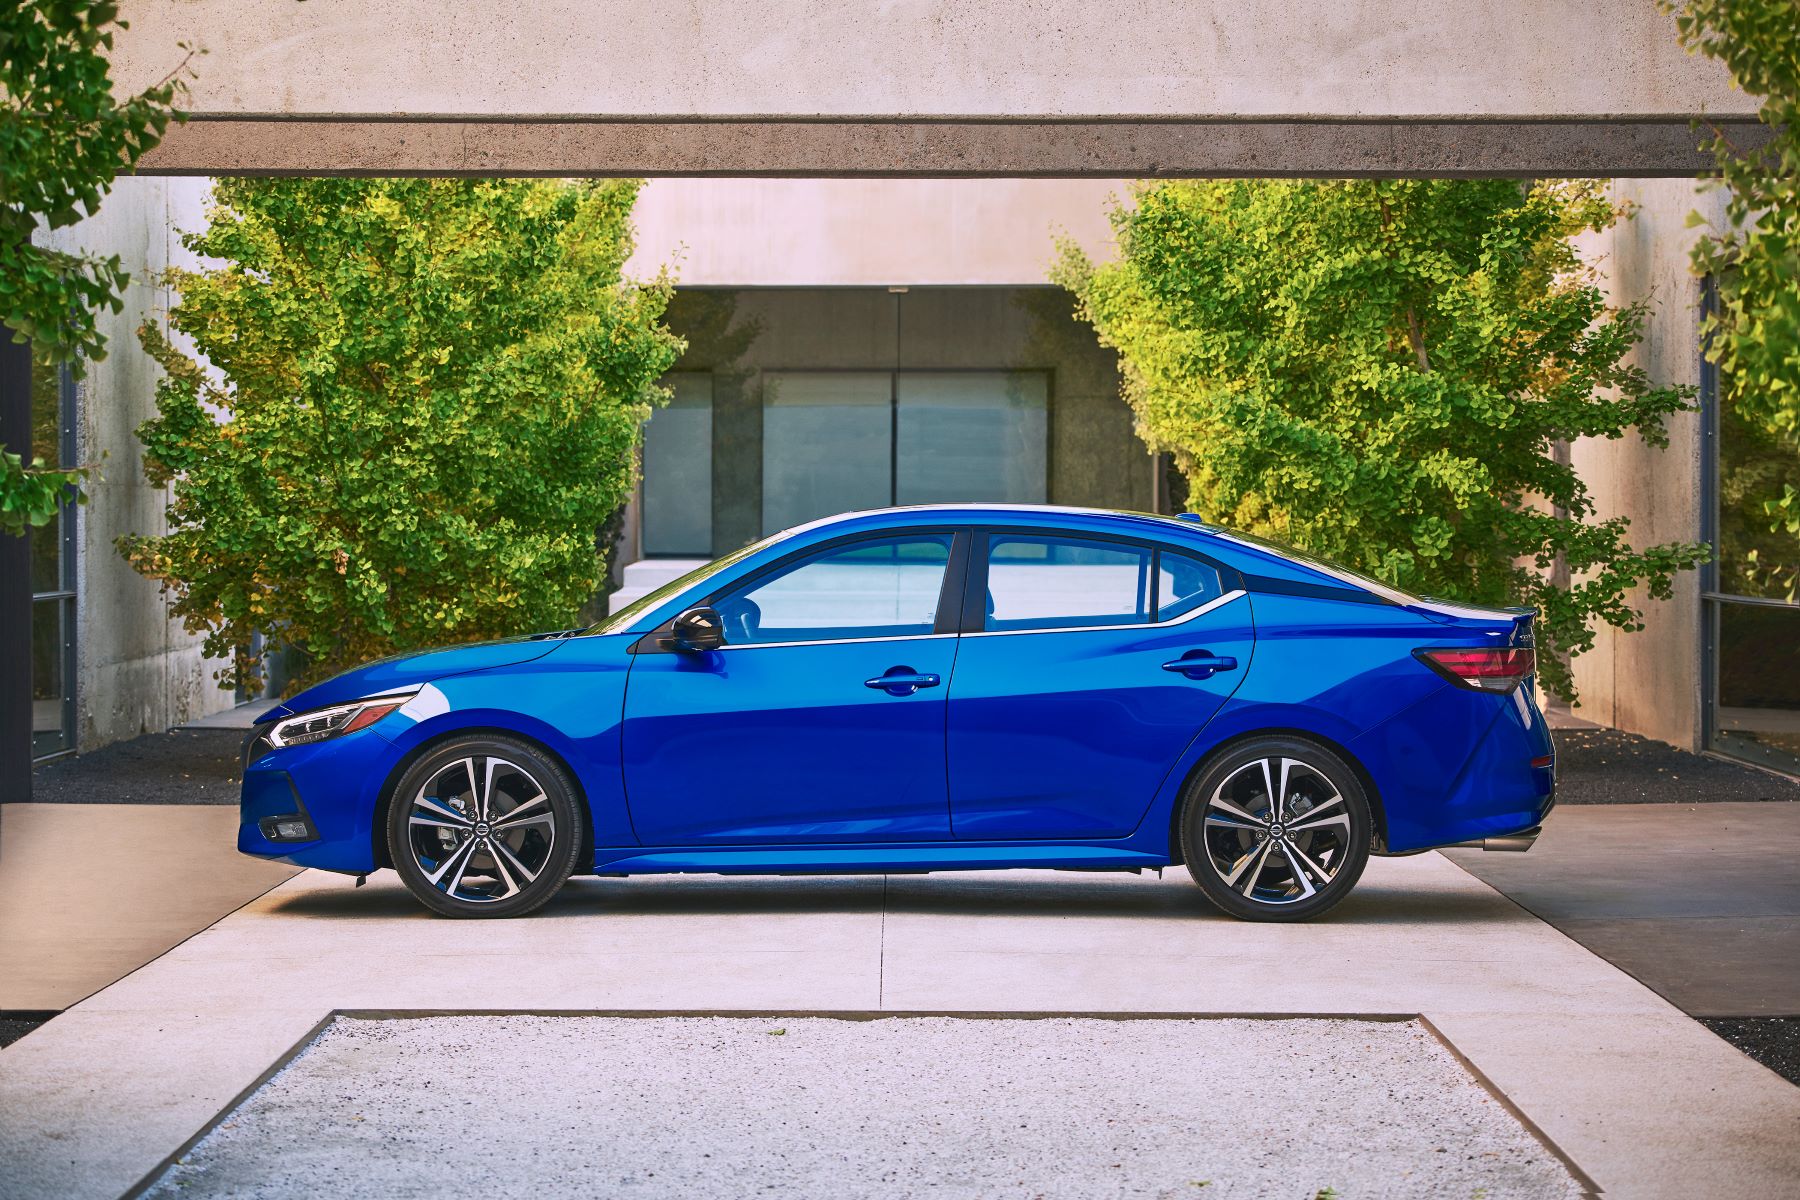 A 2022 Nissan Sentra compact sedan in blue parked in a concrete plaza surrounded by fauna